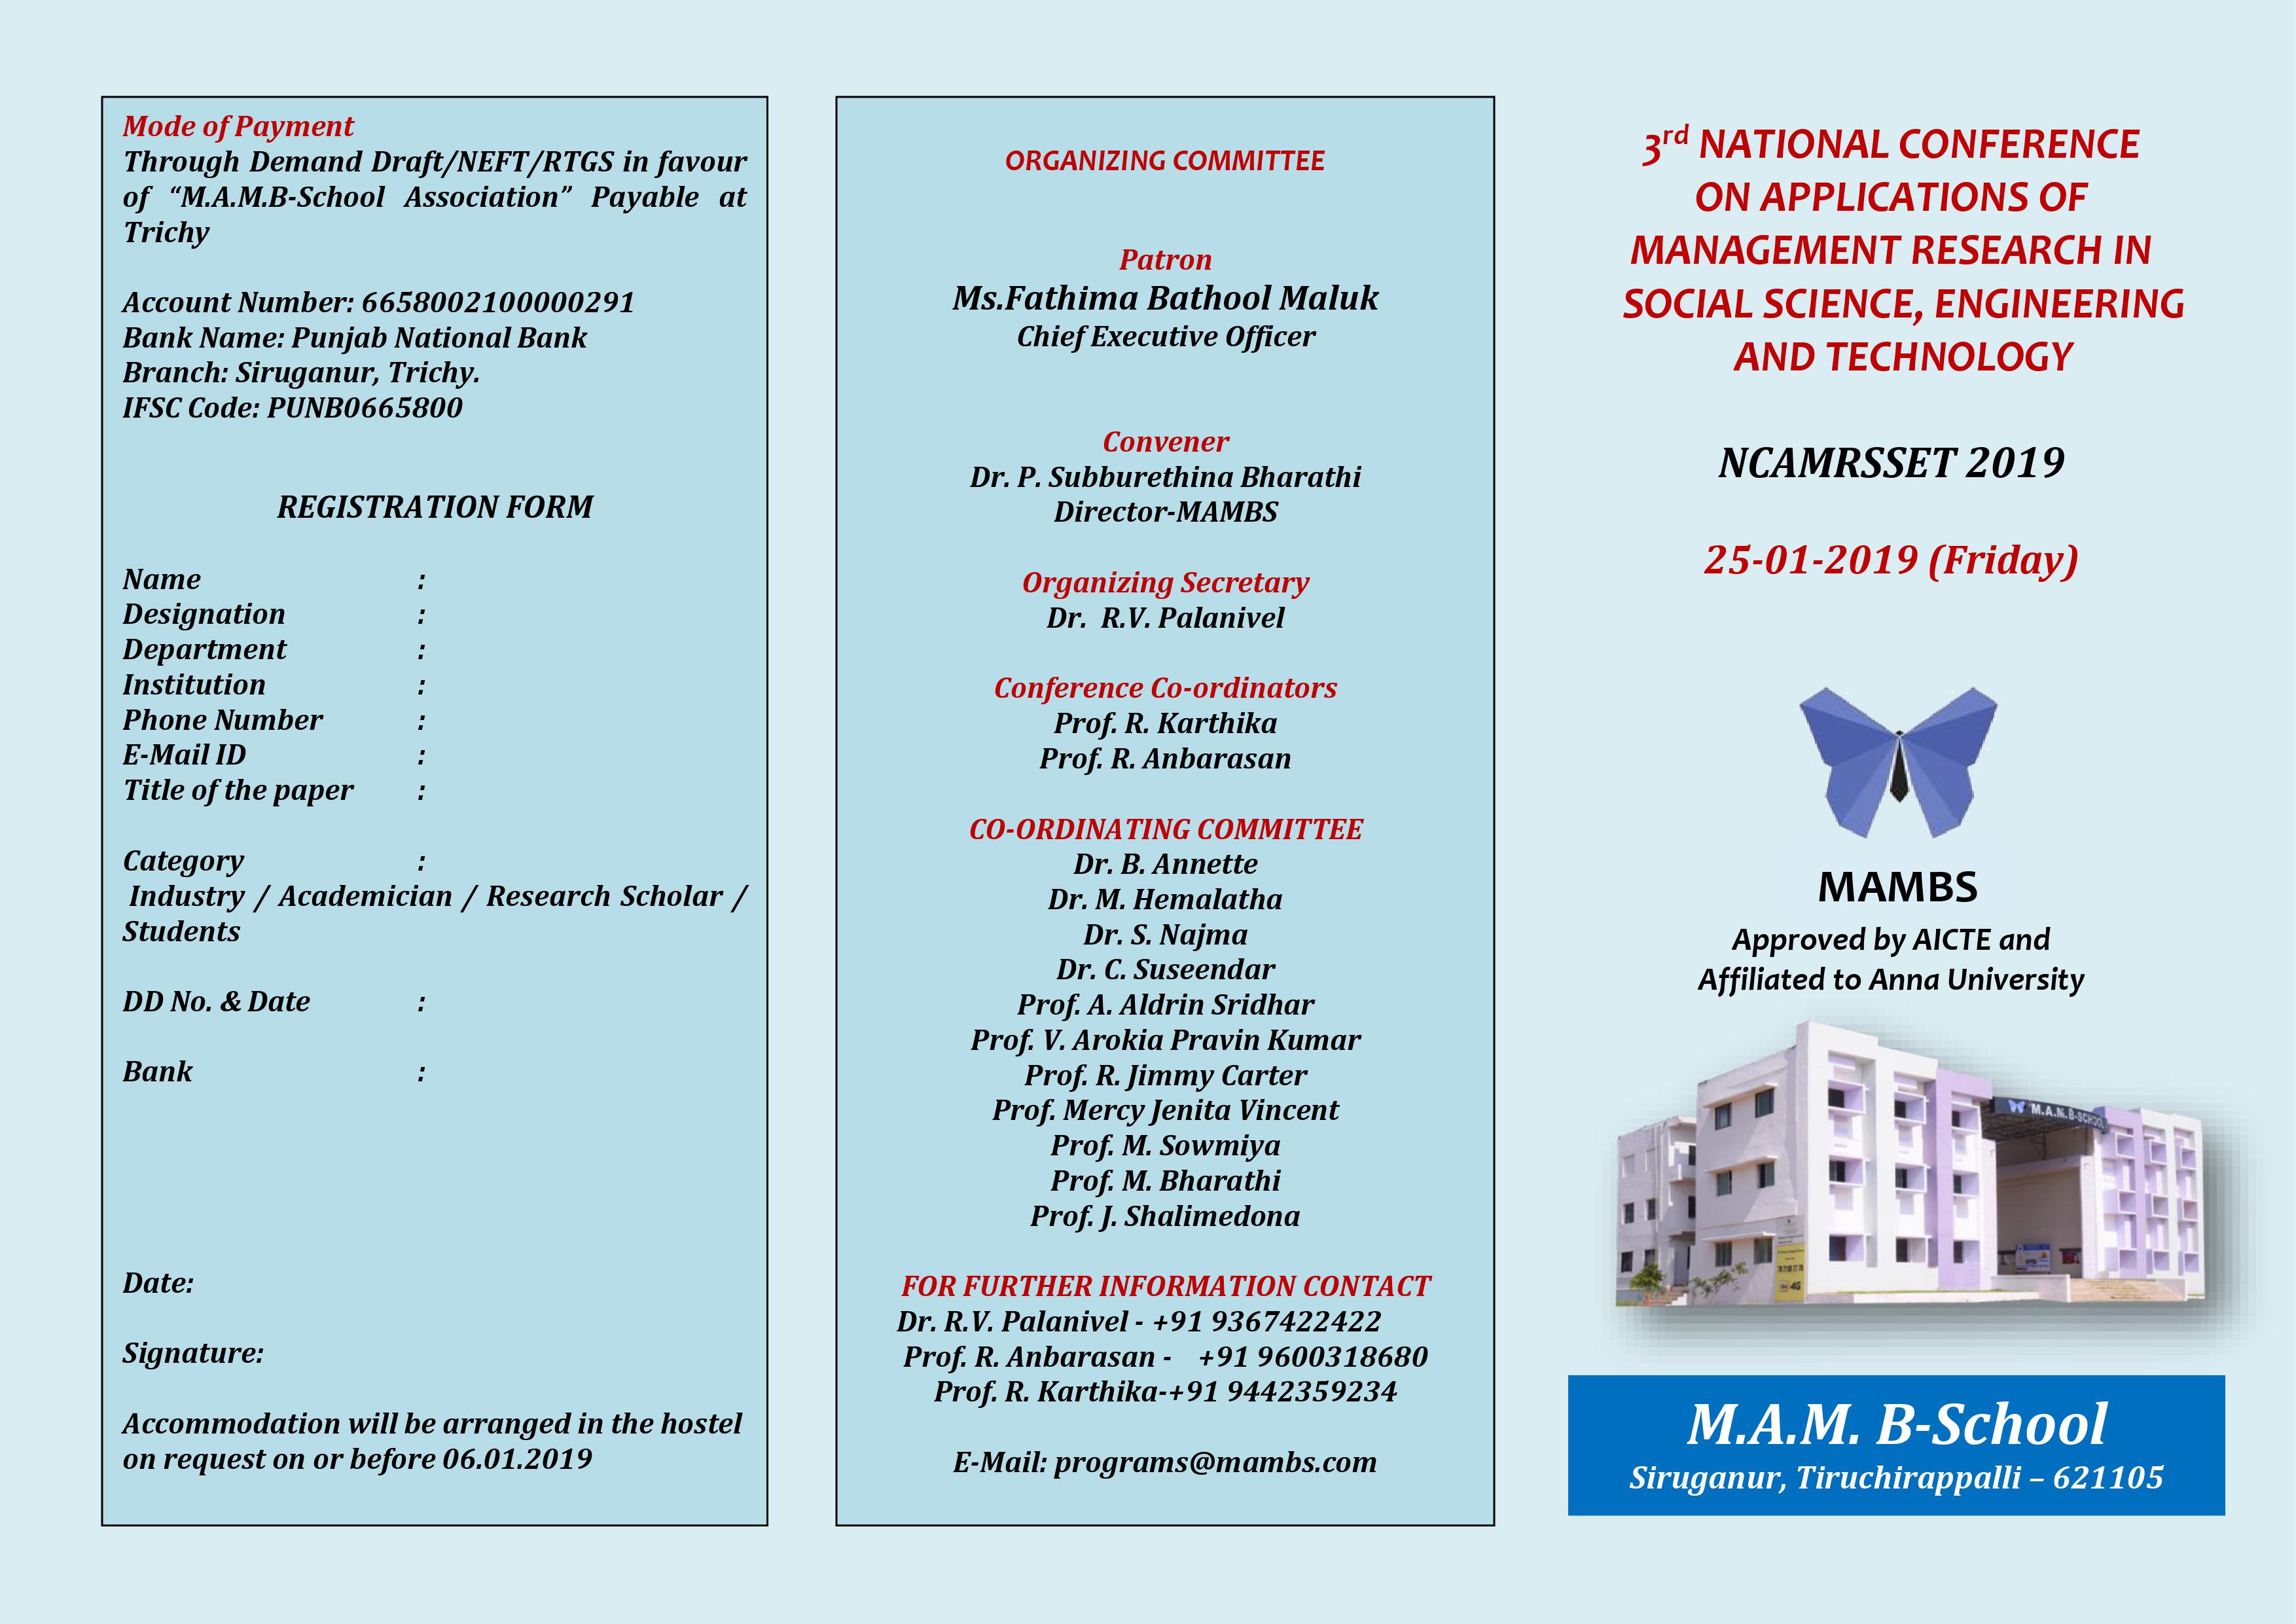 “National Conference on Application of Management Research in Social Science, Engineering and Technology” – NCAMRSSET 2019., Tiruchirappalli, Tamil Nadu, India